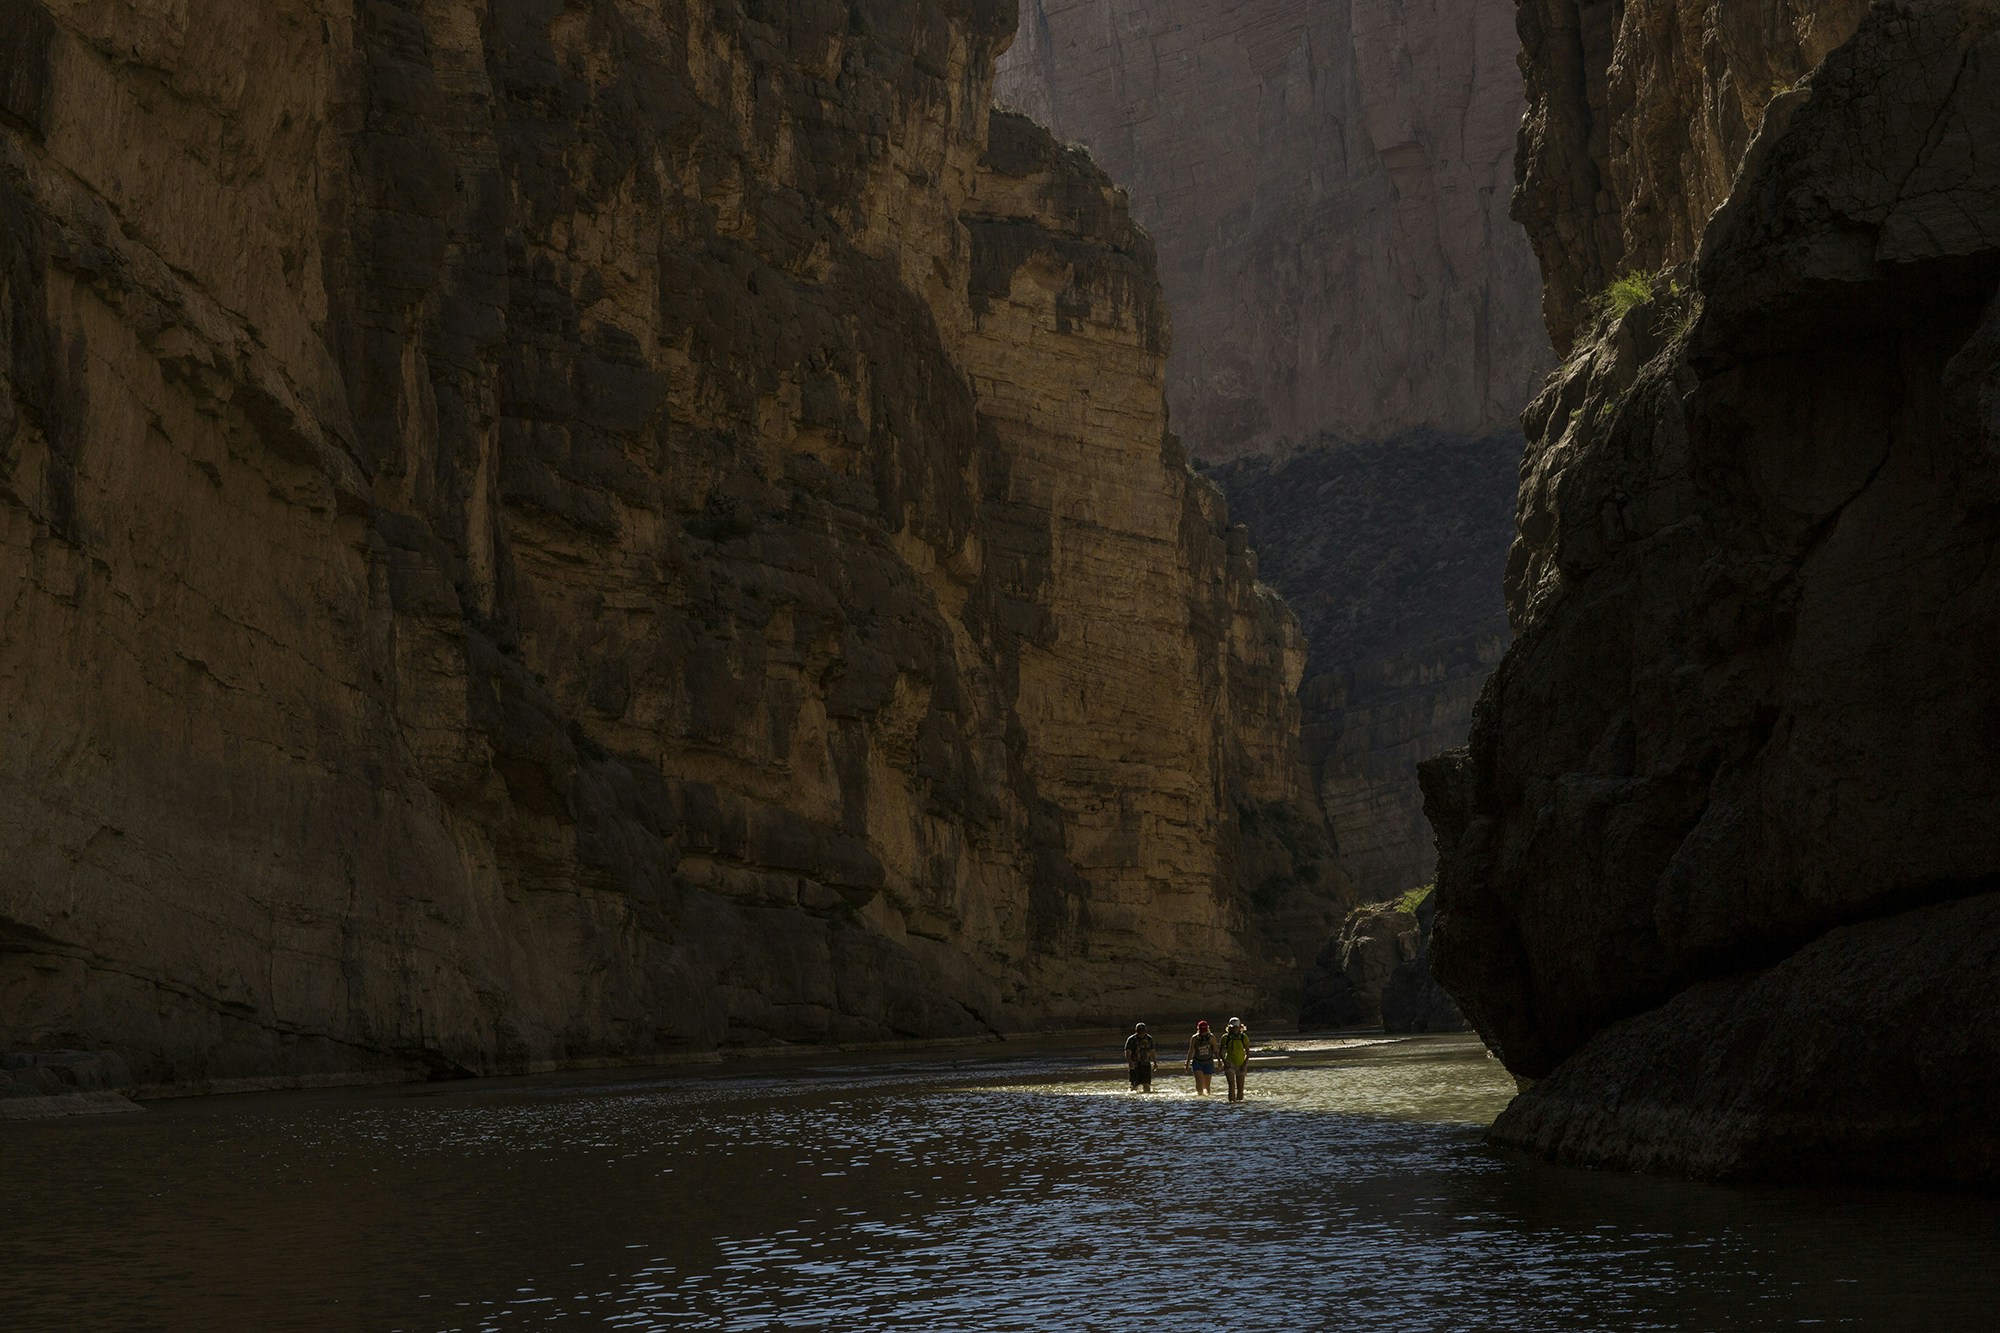 Tourists walk through Santa Elena Canyon, wading through the water of the Rio Grande, between Mexico, left, and the US, right, as they vacation at Big Bend National Park in Texas, Monday, March 27, 2017. Here the Rio Grande slides between two sheer cliff faces, one in Mexico and one in the United States, that tower 1,500 feet above the water. (AP Photo/Rodrigo Abd)